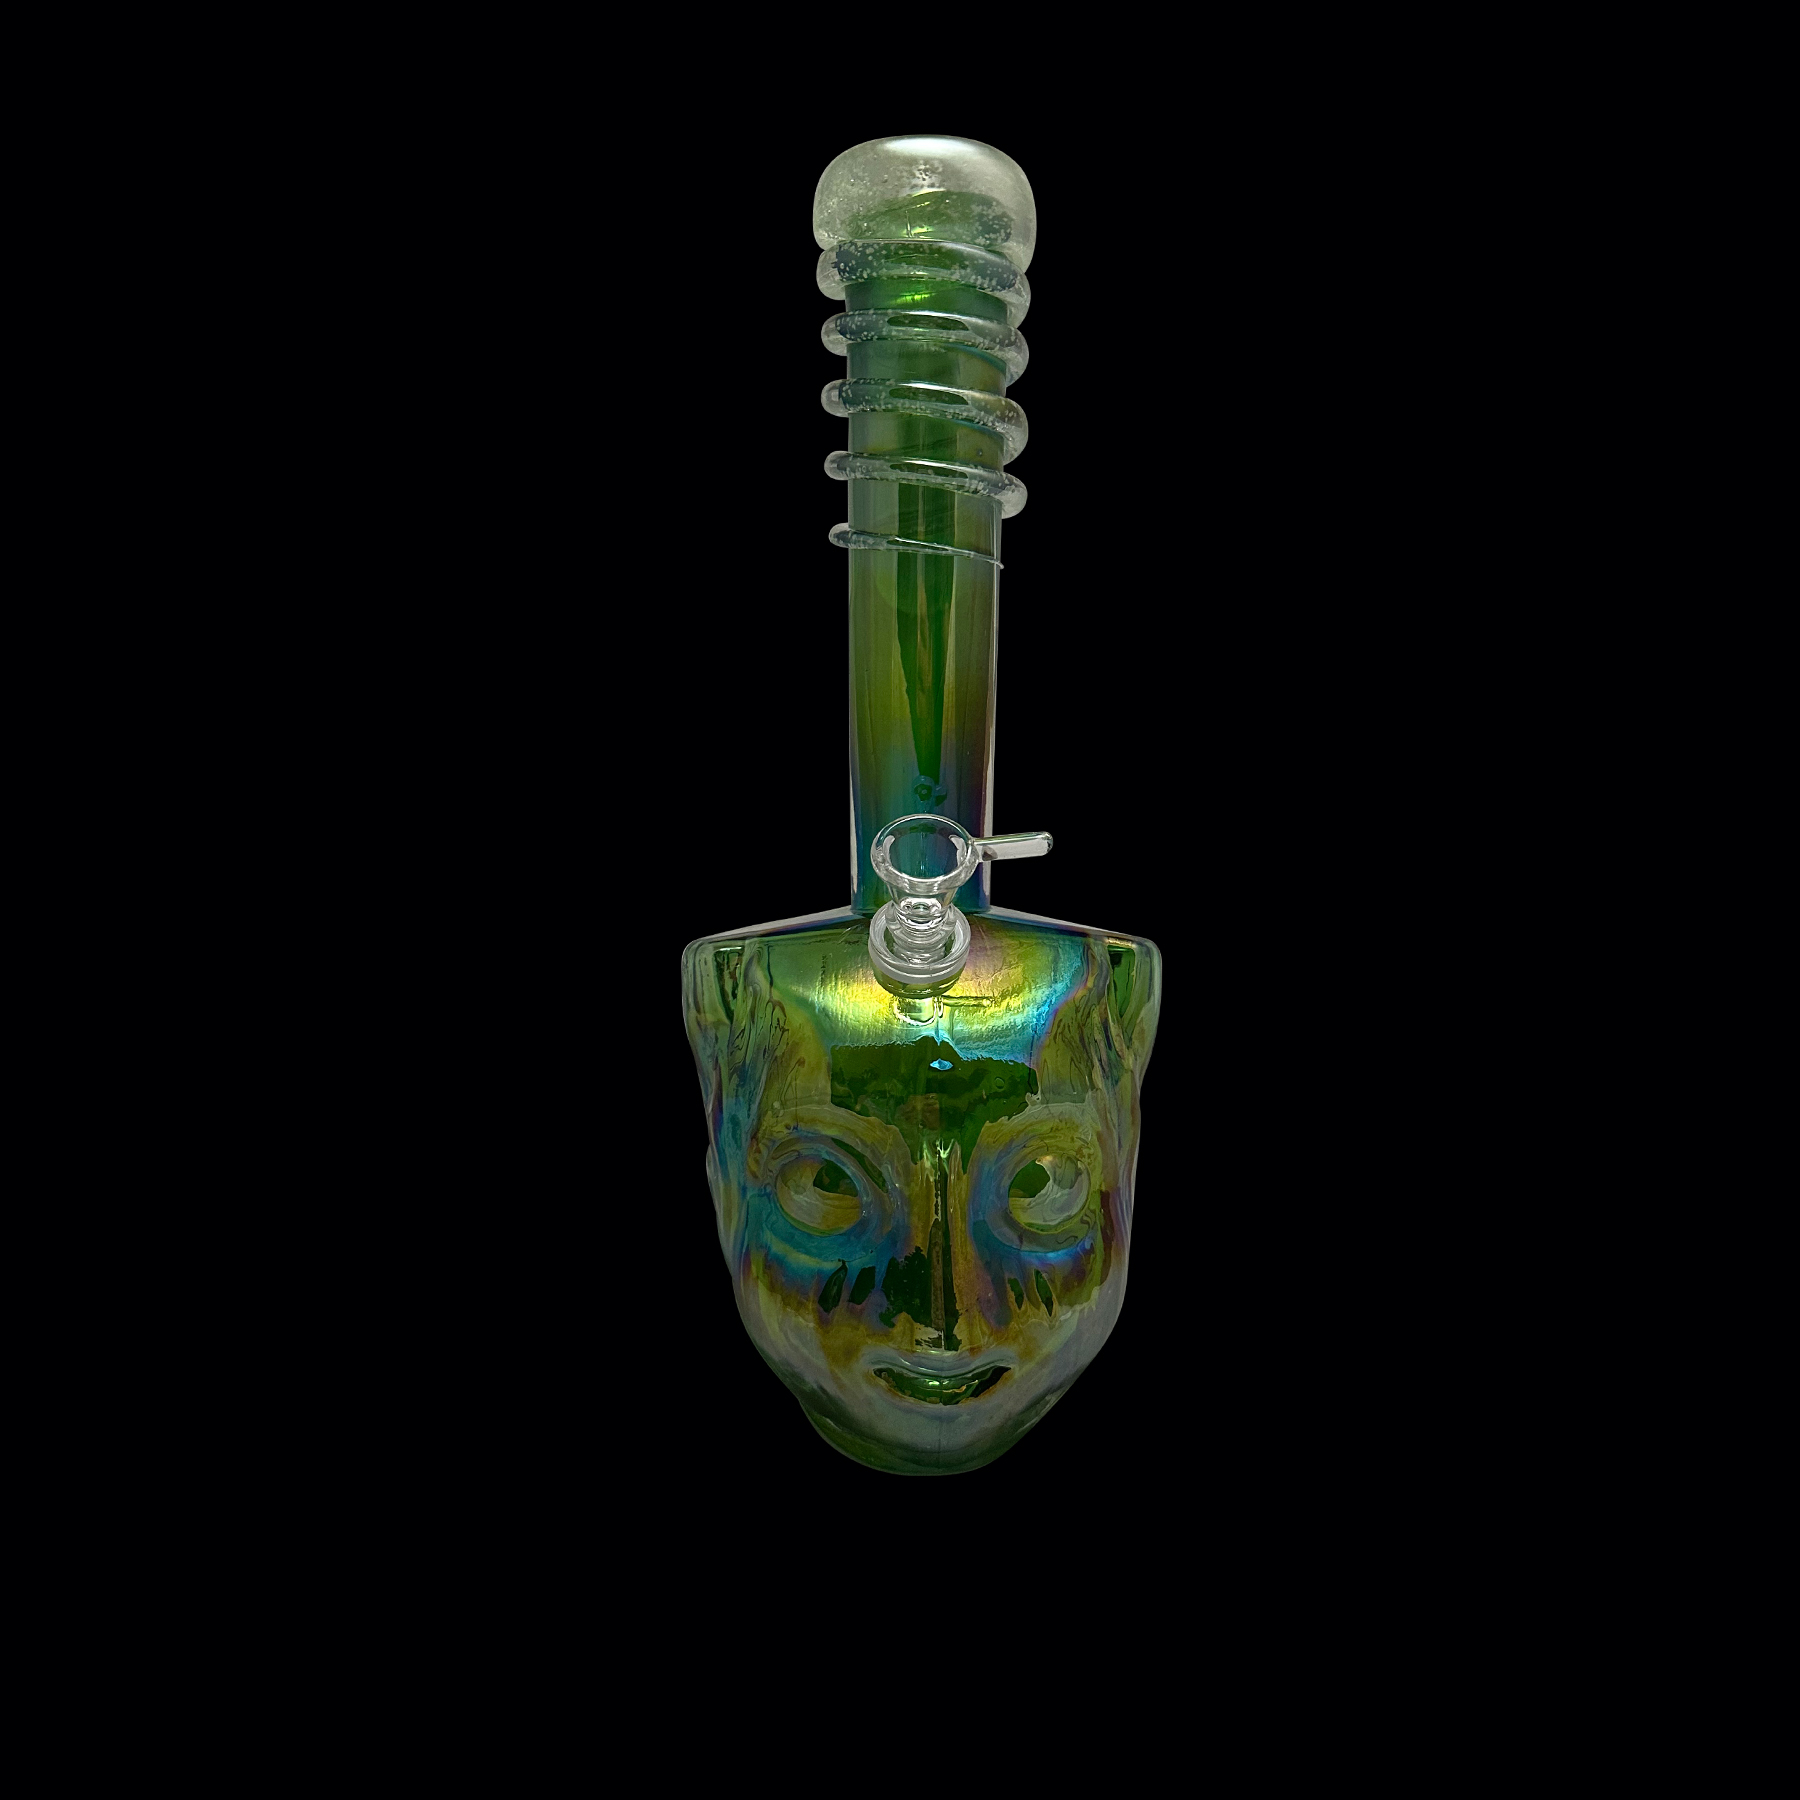 A green glass pipe with a face on it.